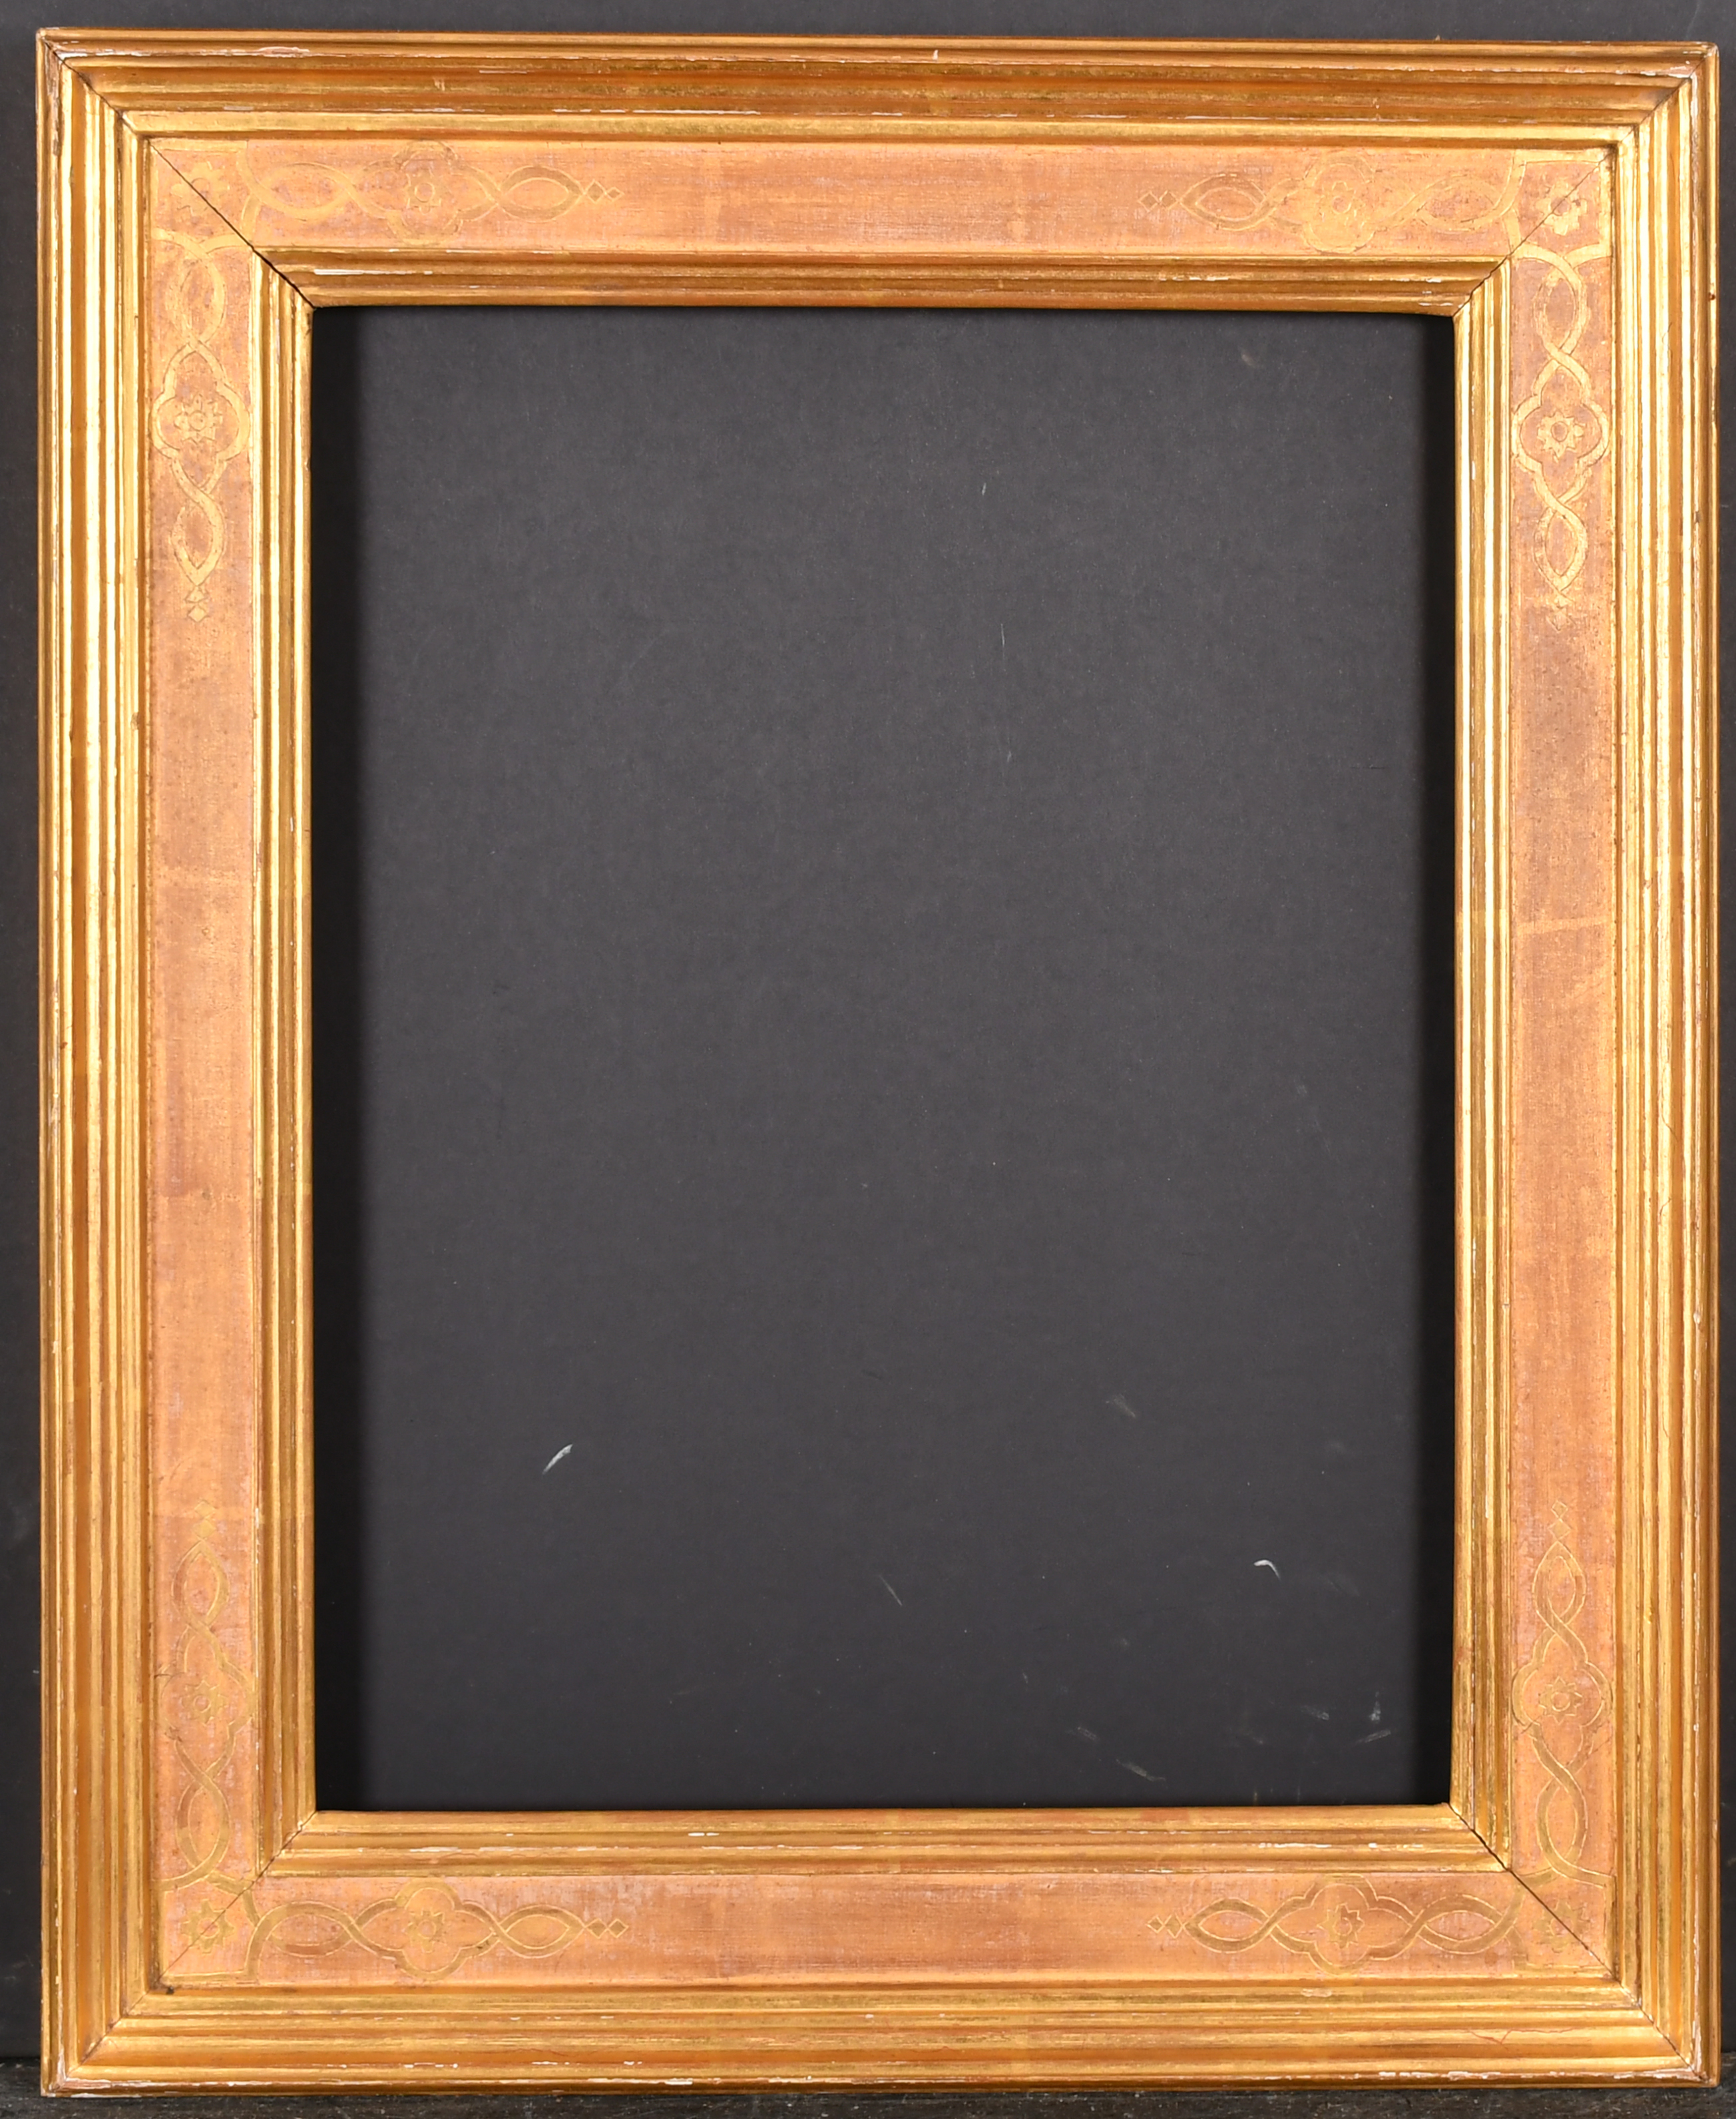 20th Century English School. A Gilt and Painted Frame, rebate 16" x 12.75" (40.6 x 32.4cm) - Image 2 of 3